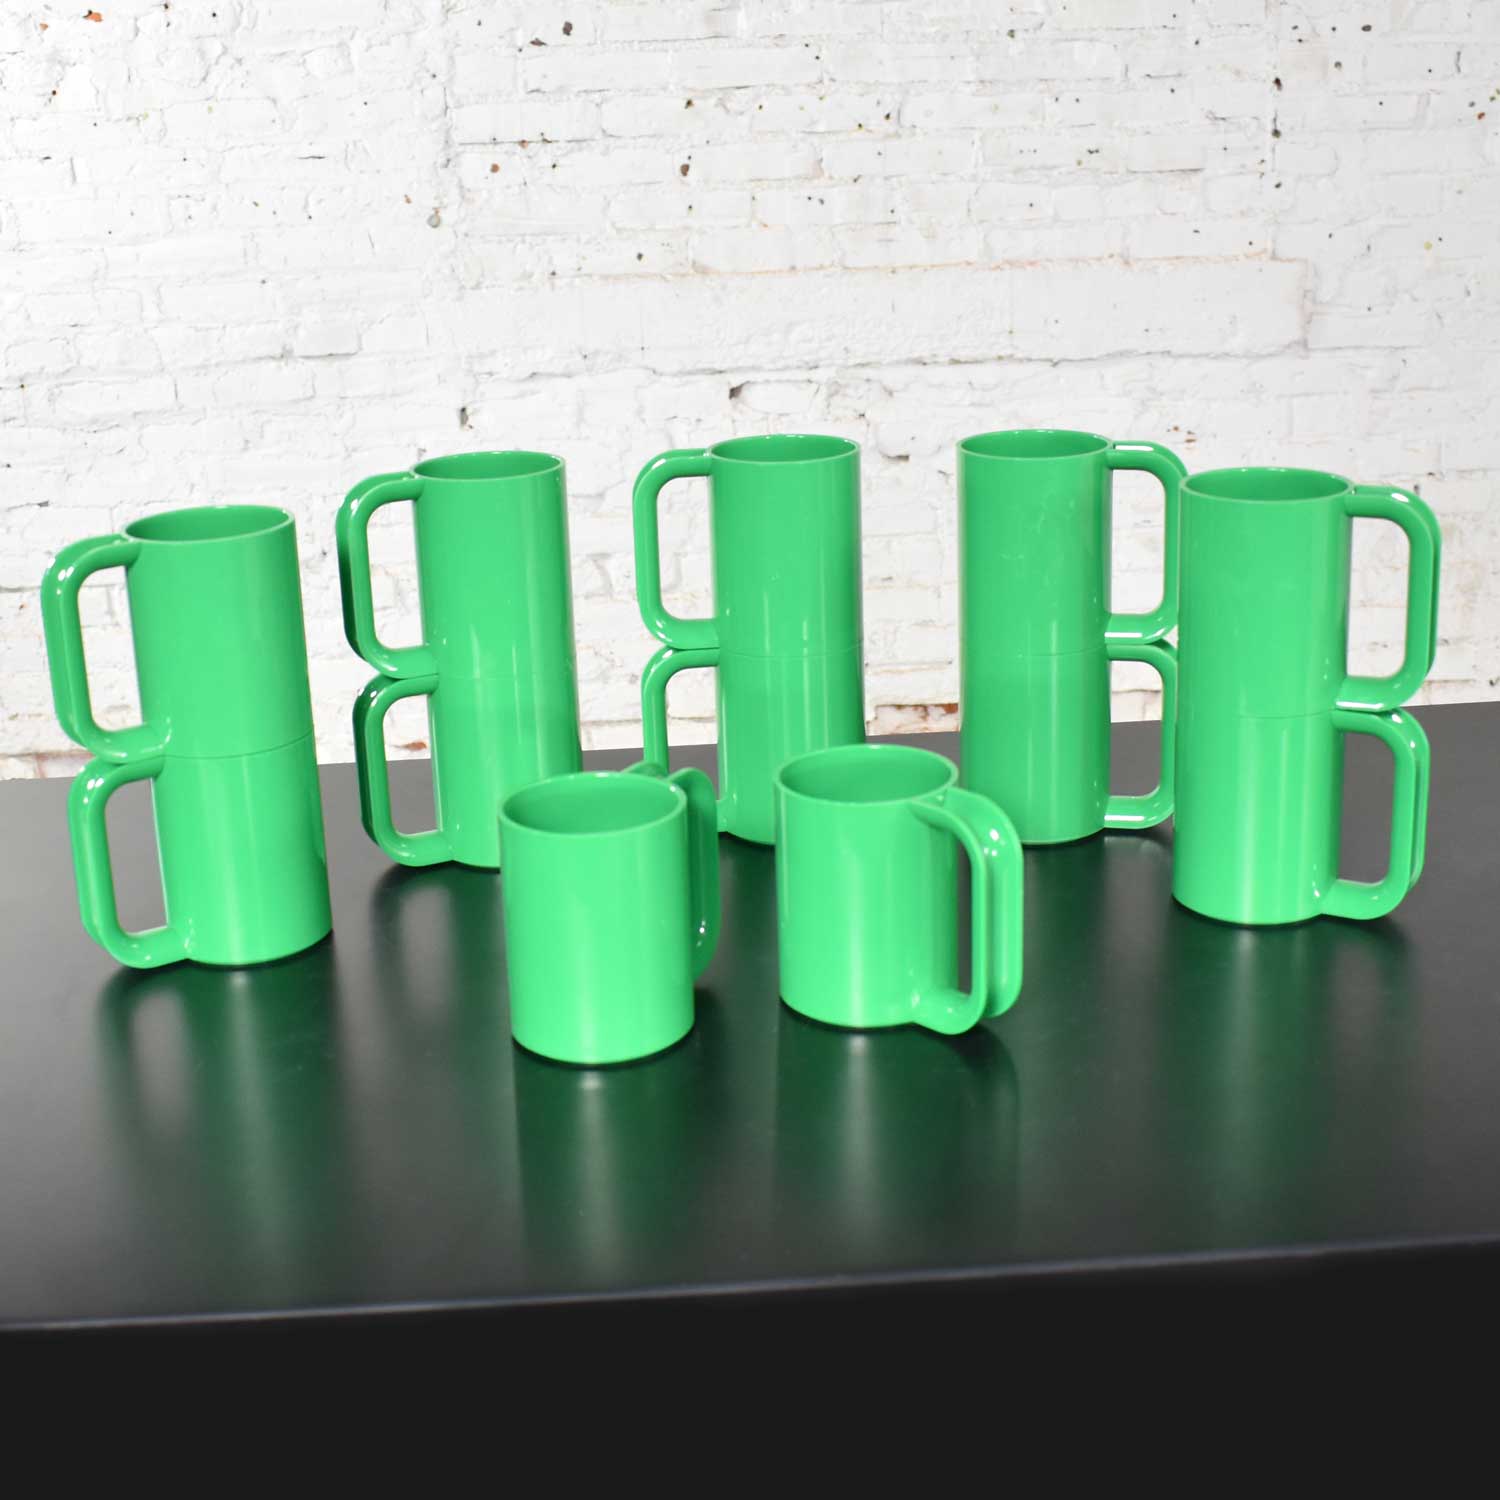 Heller Dinnerware by Lella and Massimo Vignelli in Kelly Green 58 Pieces Plus Napkins